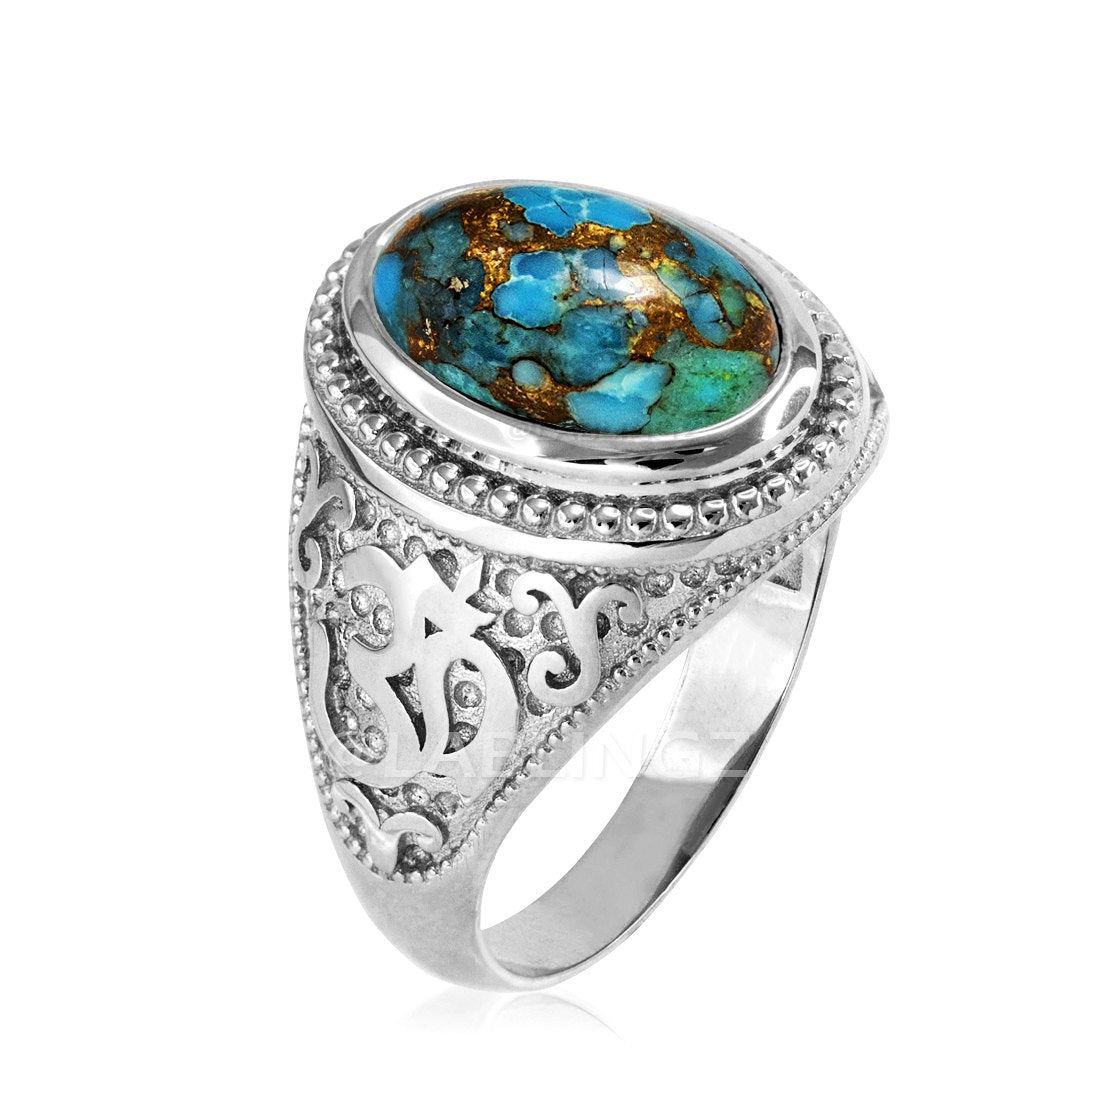 Sterling Silver Om (Aum) Mantra Ring with Blue Copper Turquoise Karma Blingz